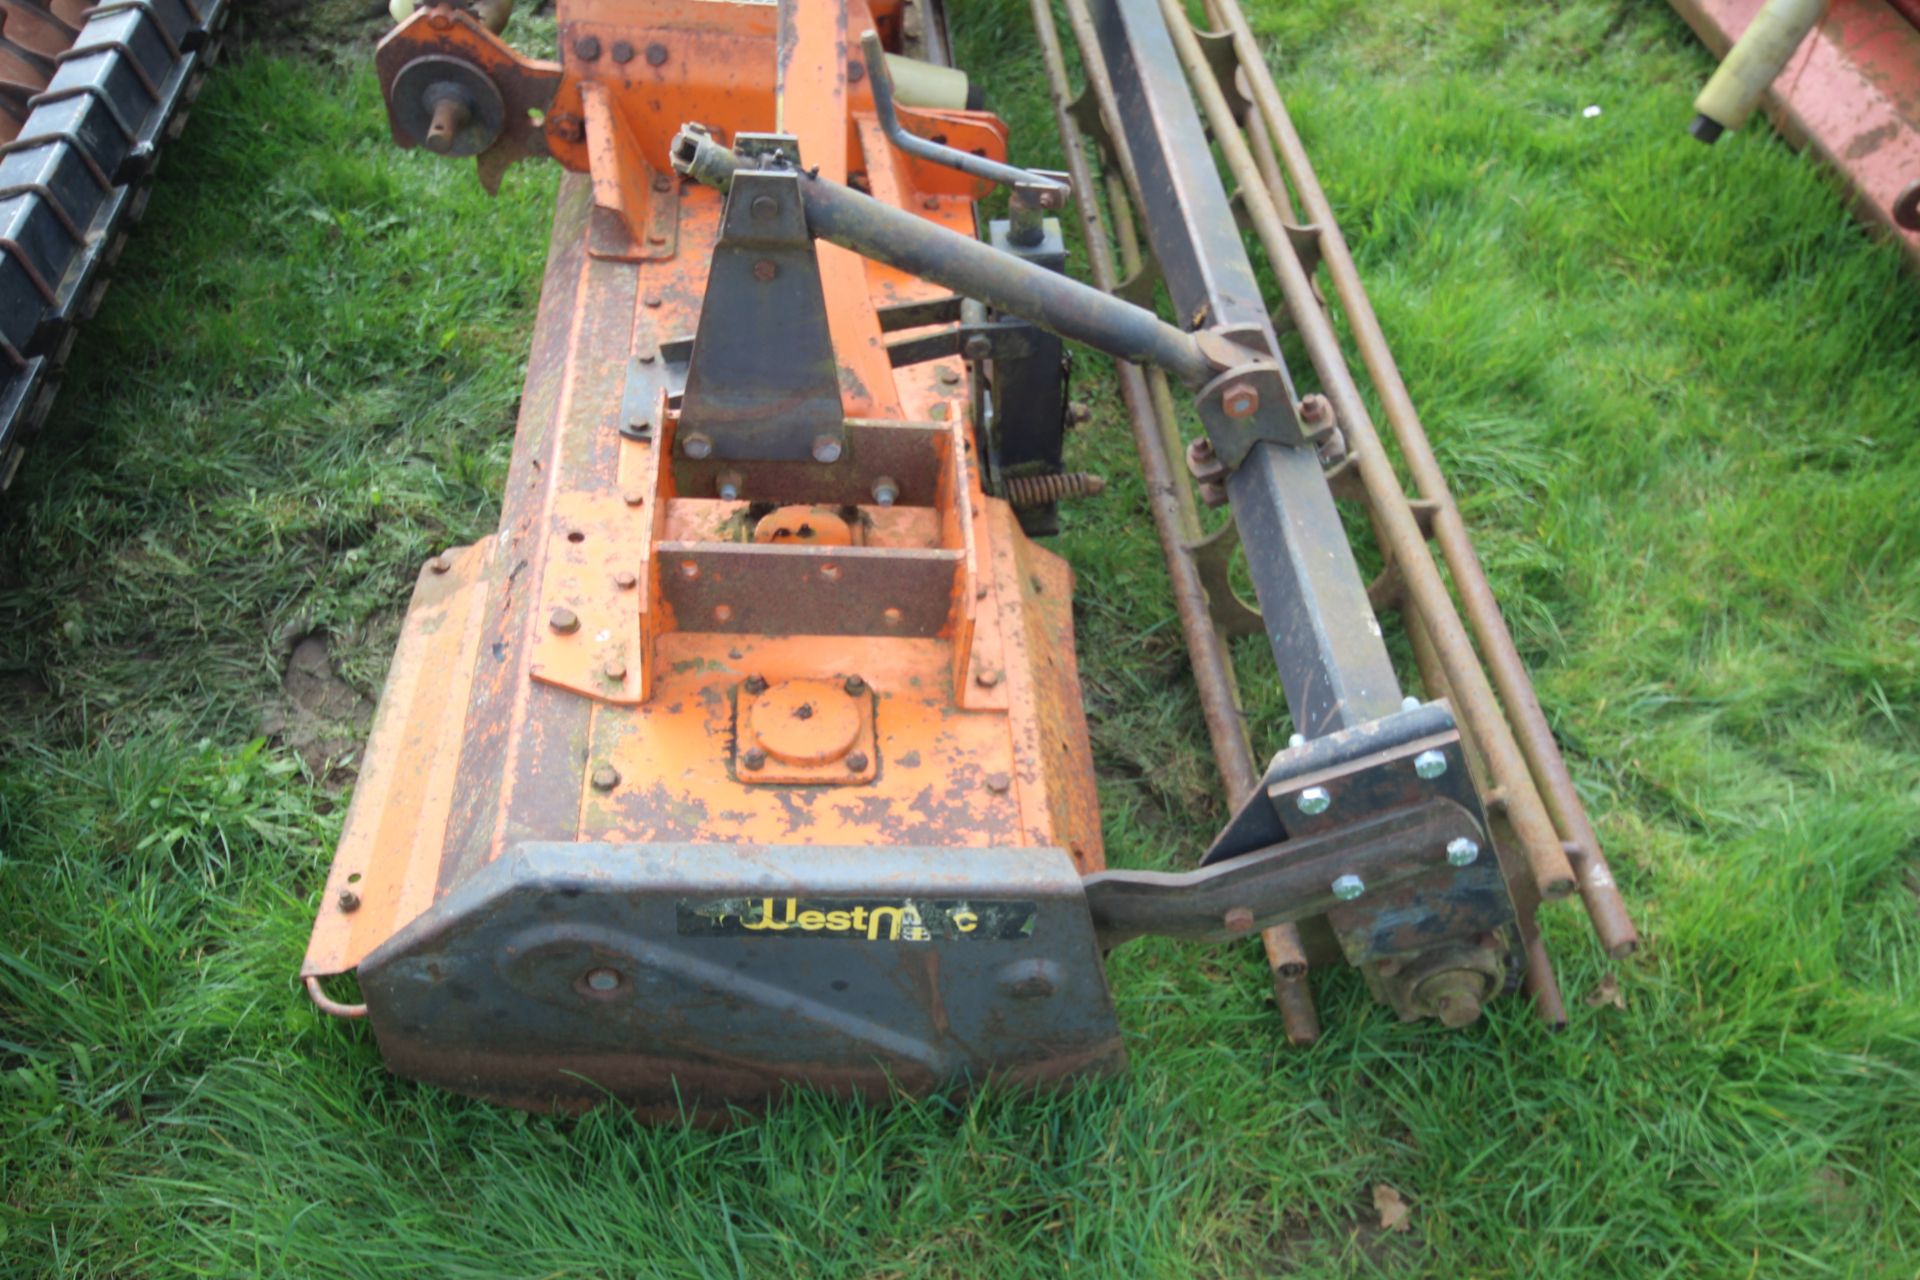 Westmac Pegararo 3m power harrow. Vendor reports owned since 2001 and used regularly. For sale due - Image 6 of 16